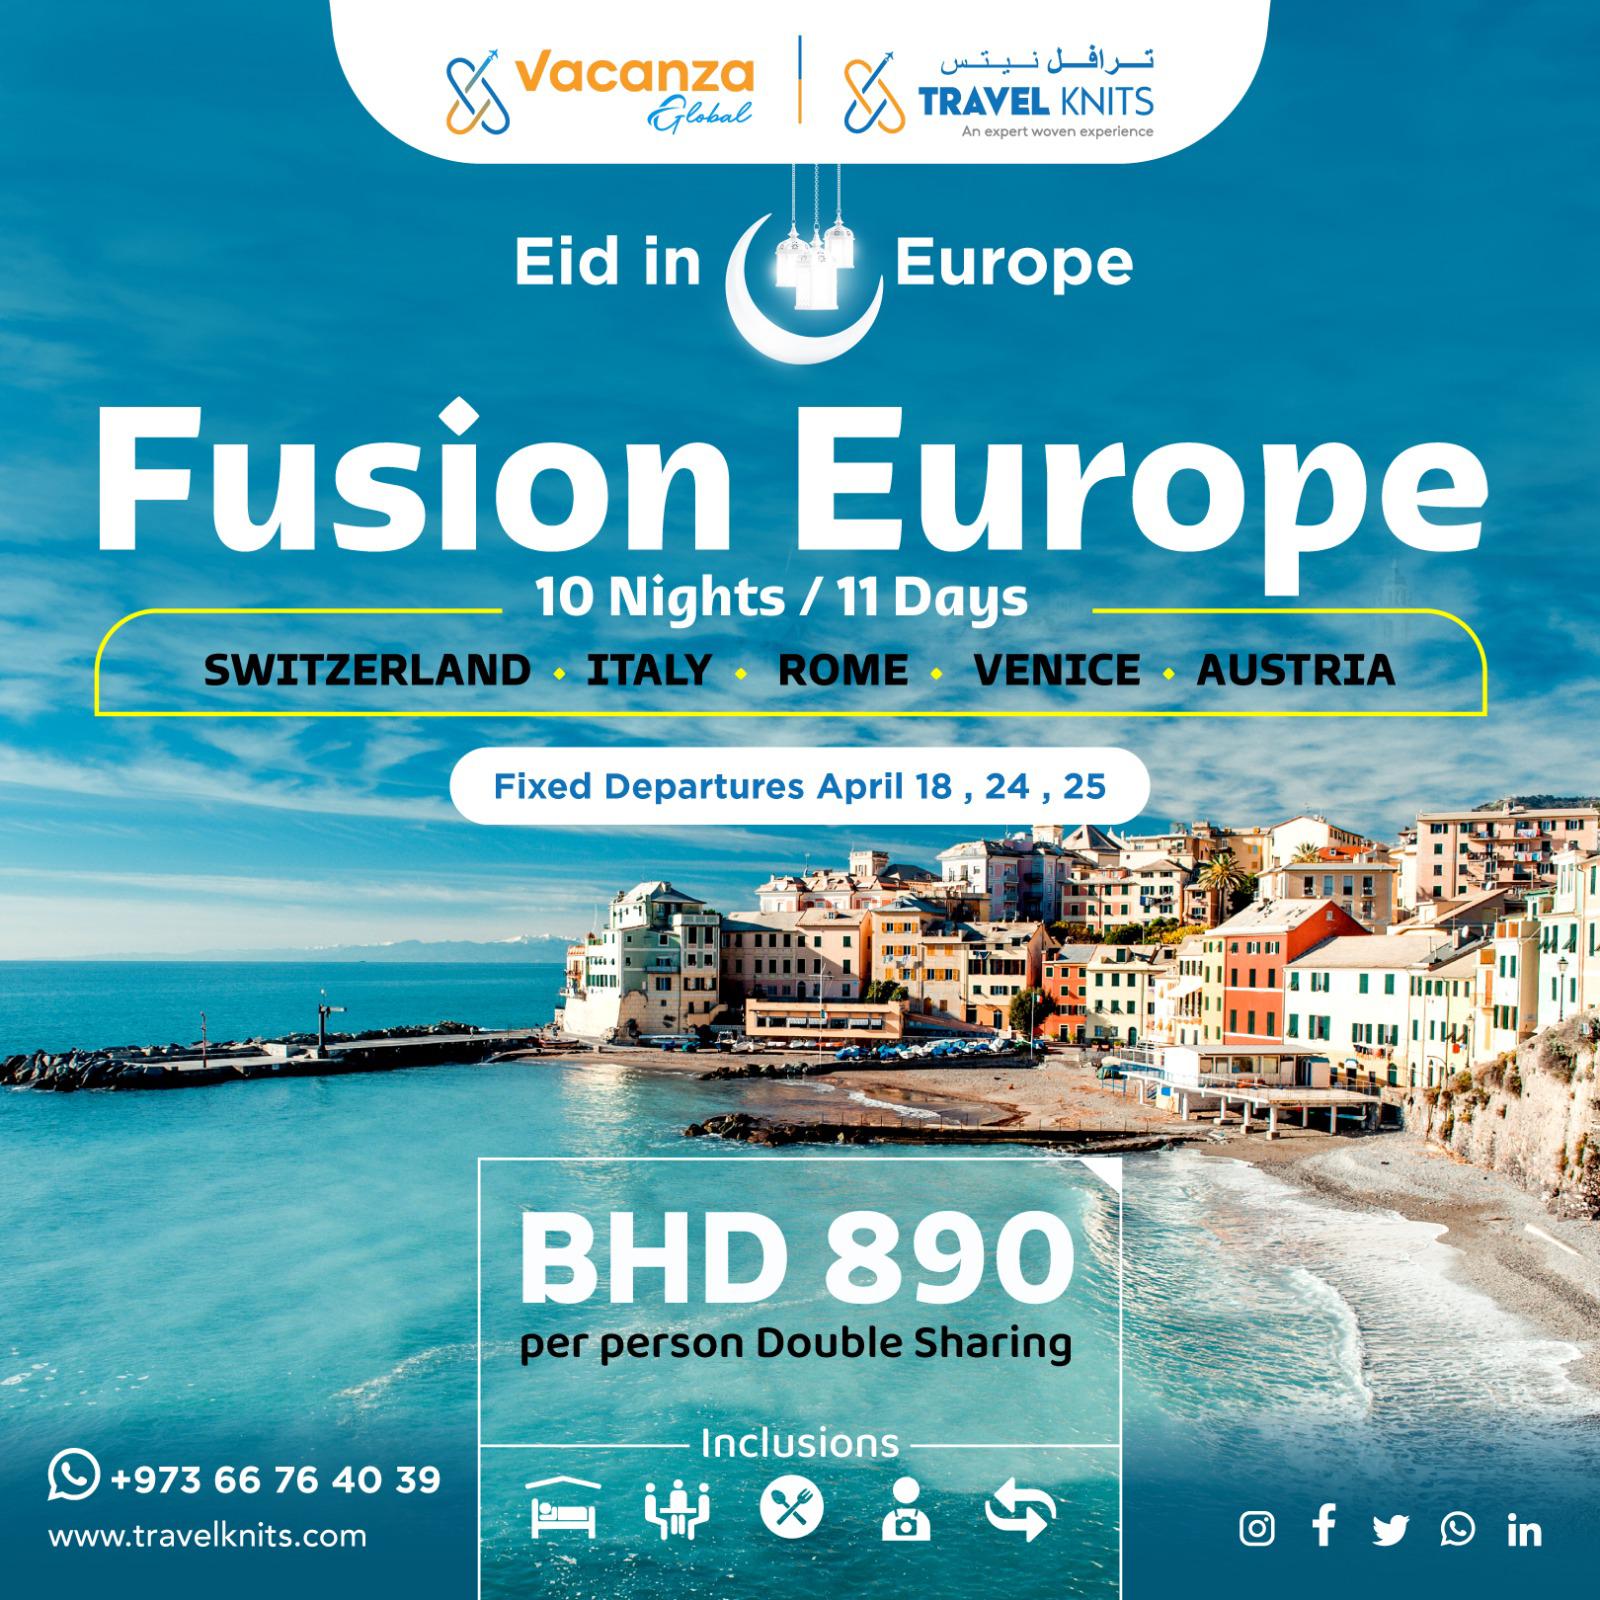 FUSION EUROPE|Europe countriesTour Packages - Book honeymoon ,family,adventure tour packages to Europe countries|Travel Knits												